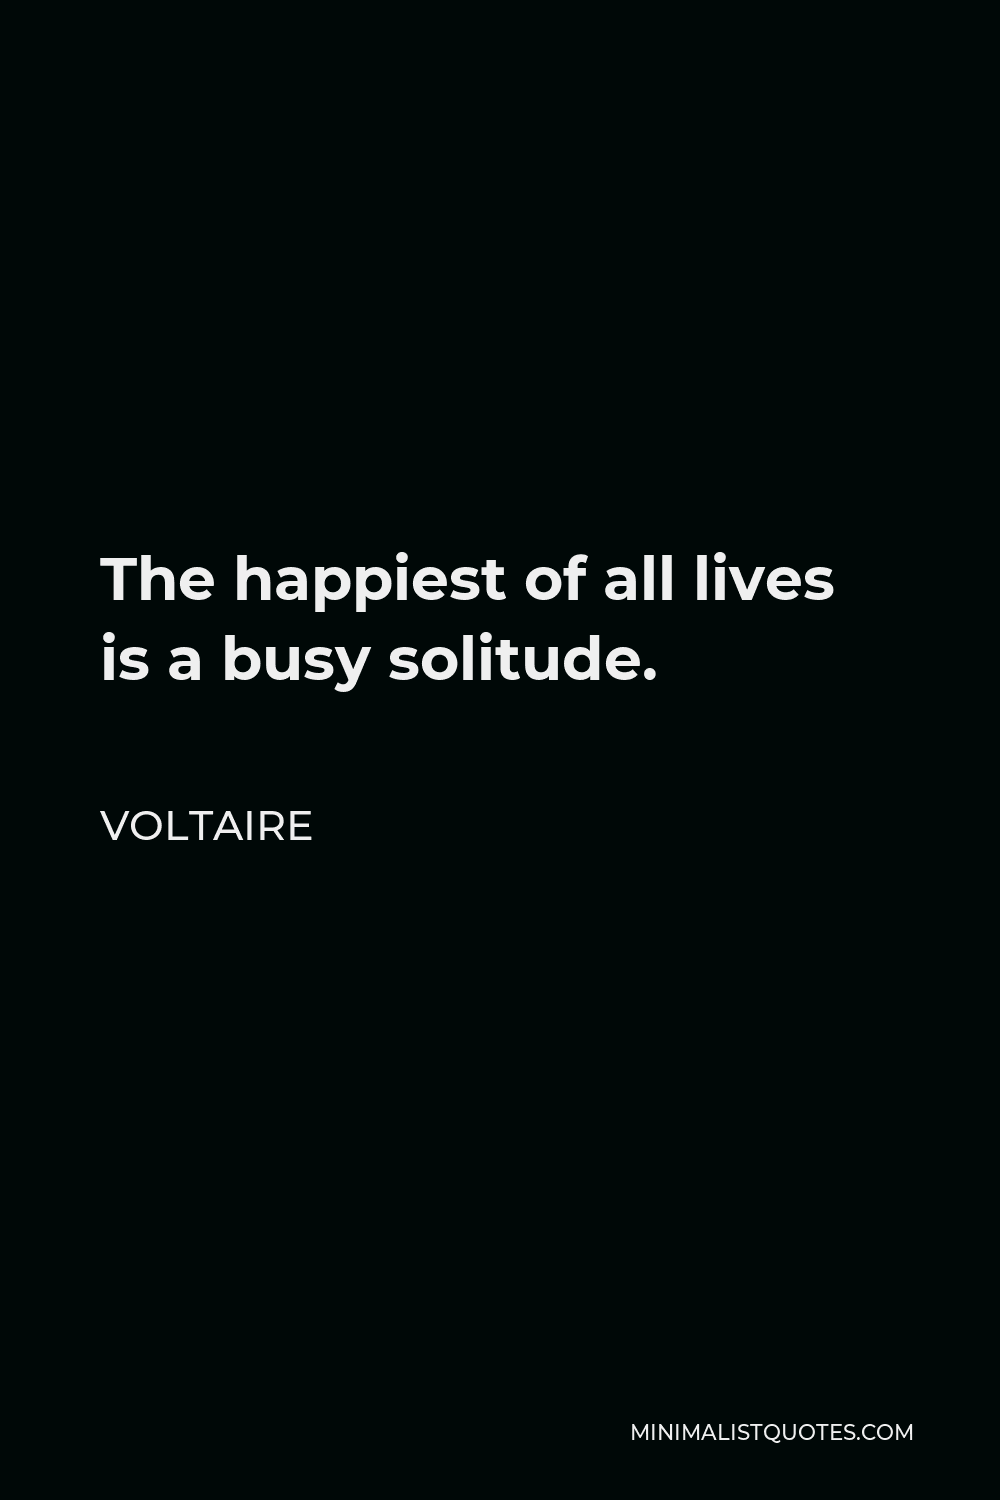 Voltaire Quote - The happiest of all lives is a busy solitude.